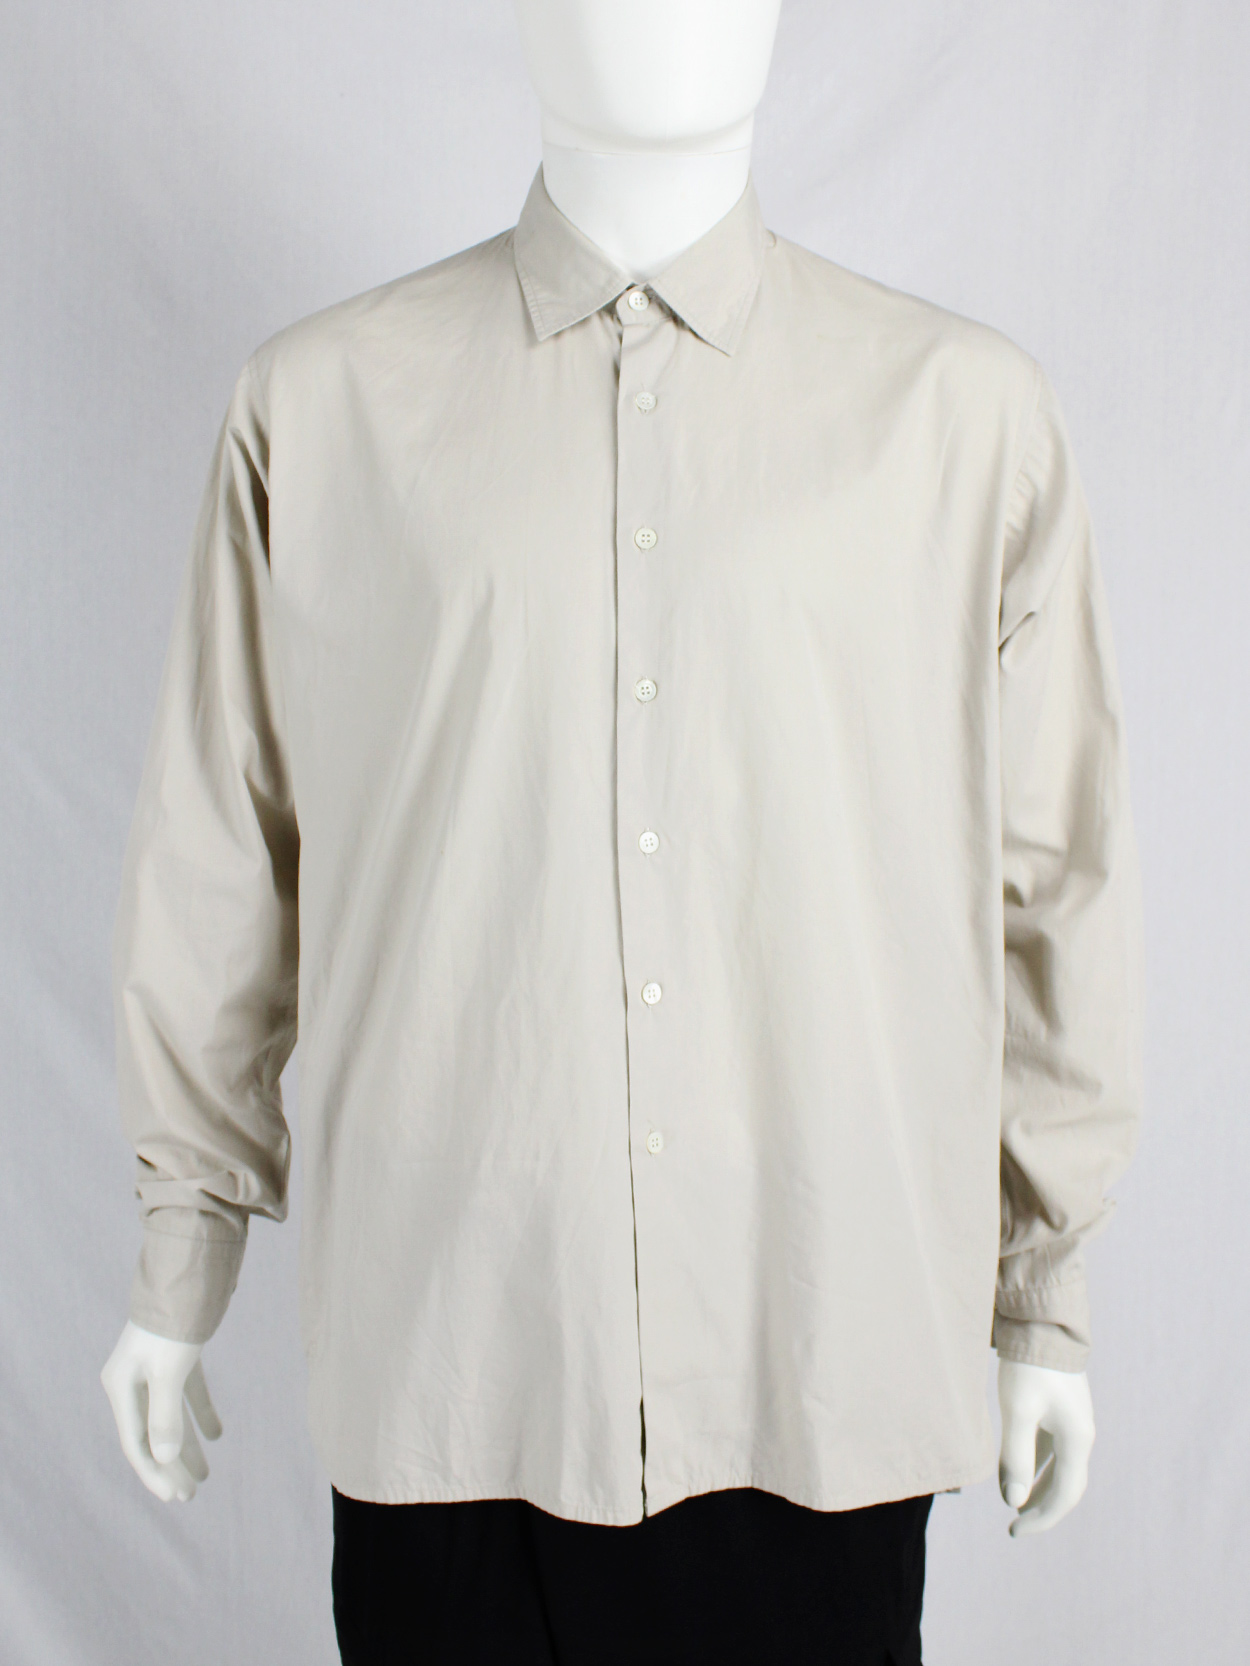 Dries Van Noten beige oversized shirt with straight fit - V A N II T A S